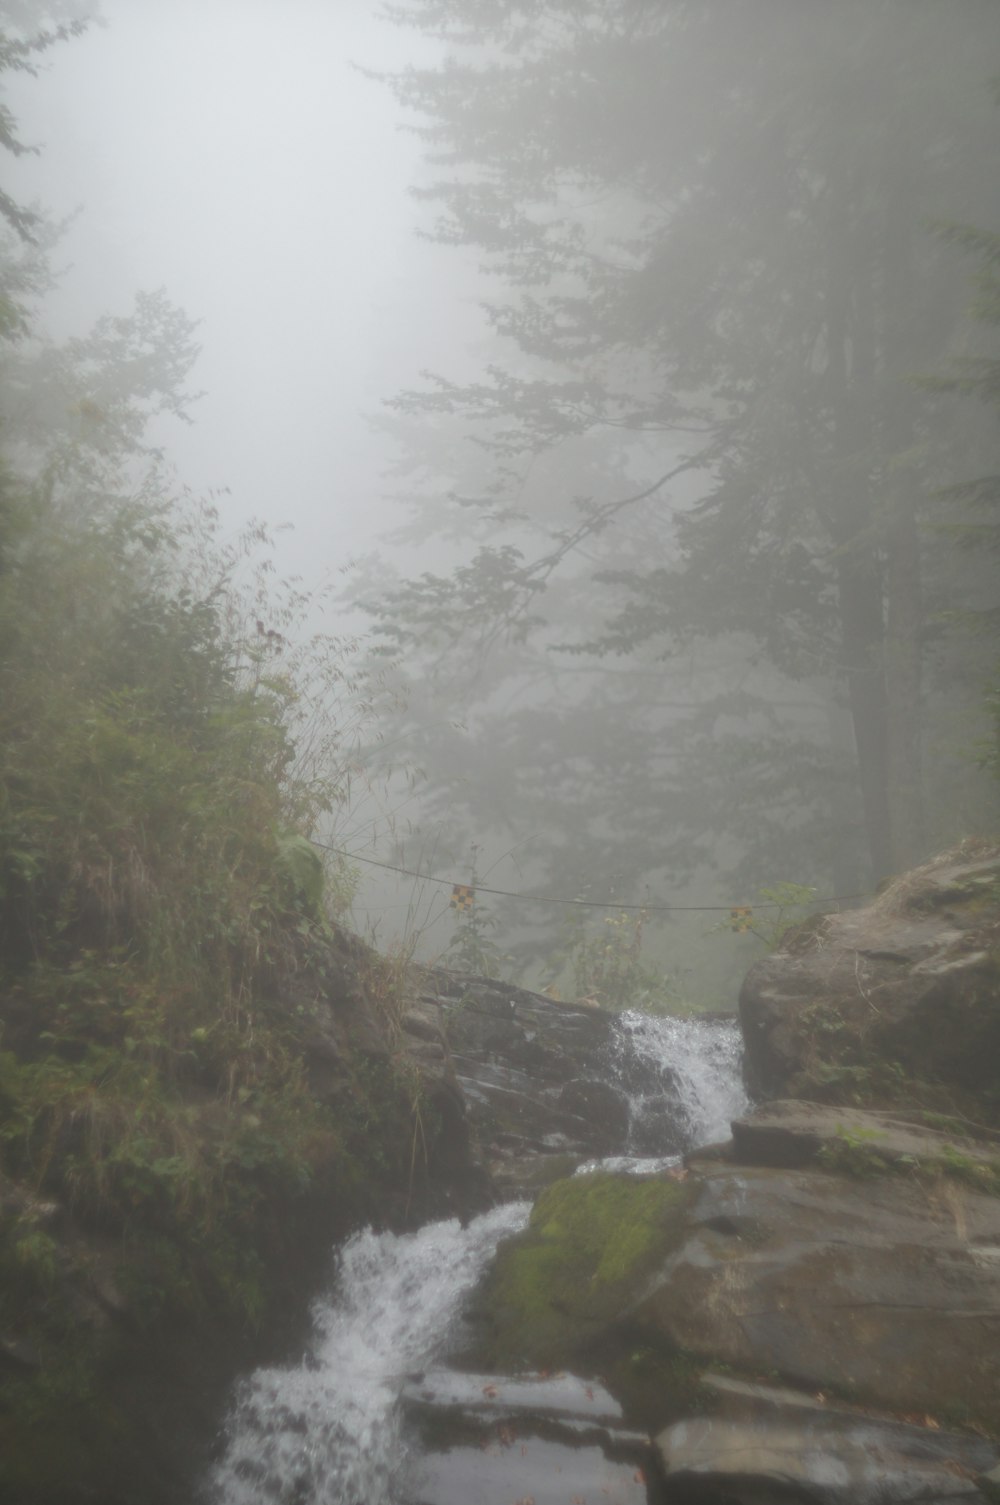 green trees on brown rocky mountain during foggy weather